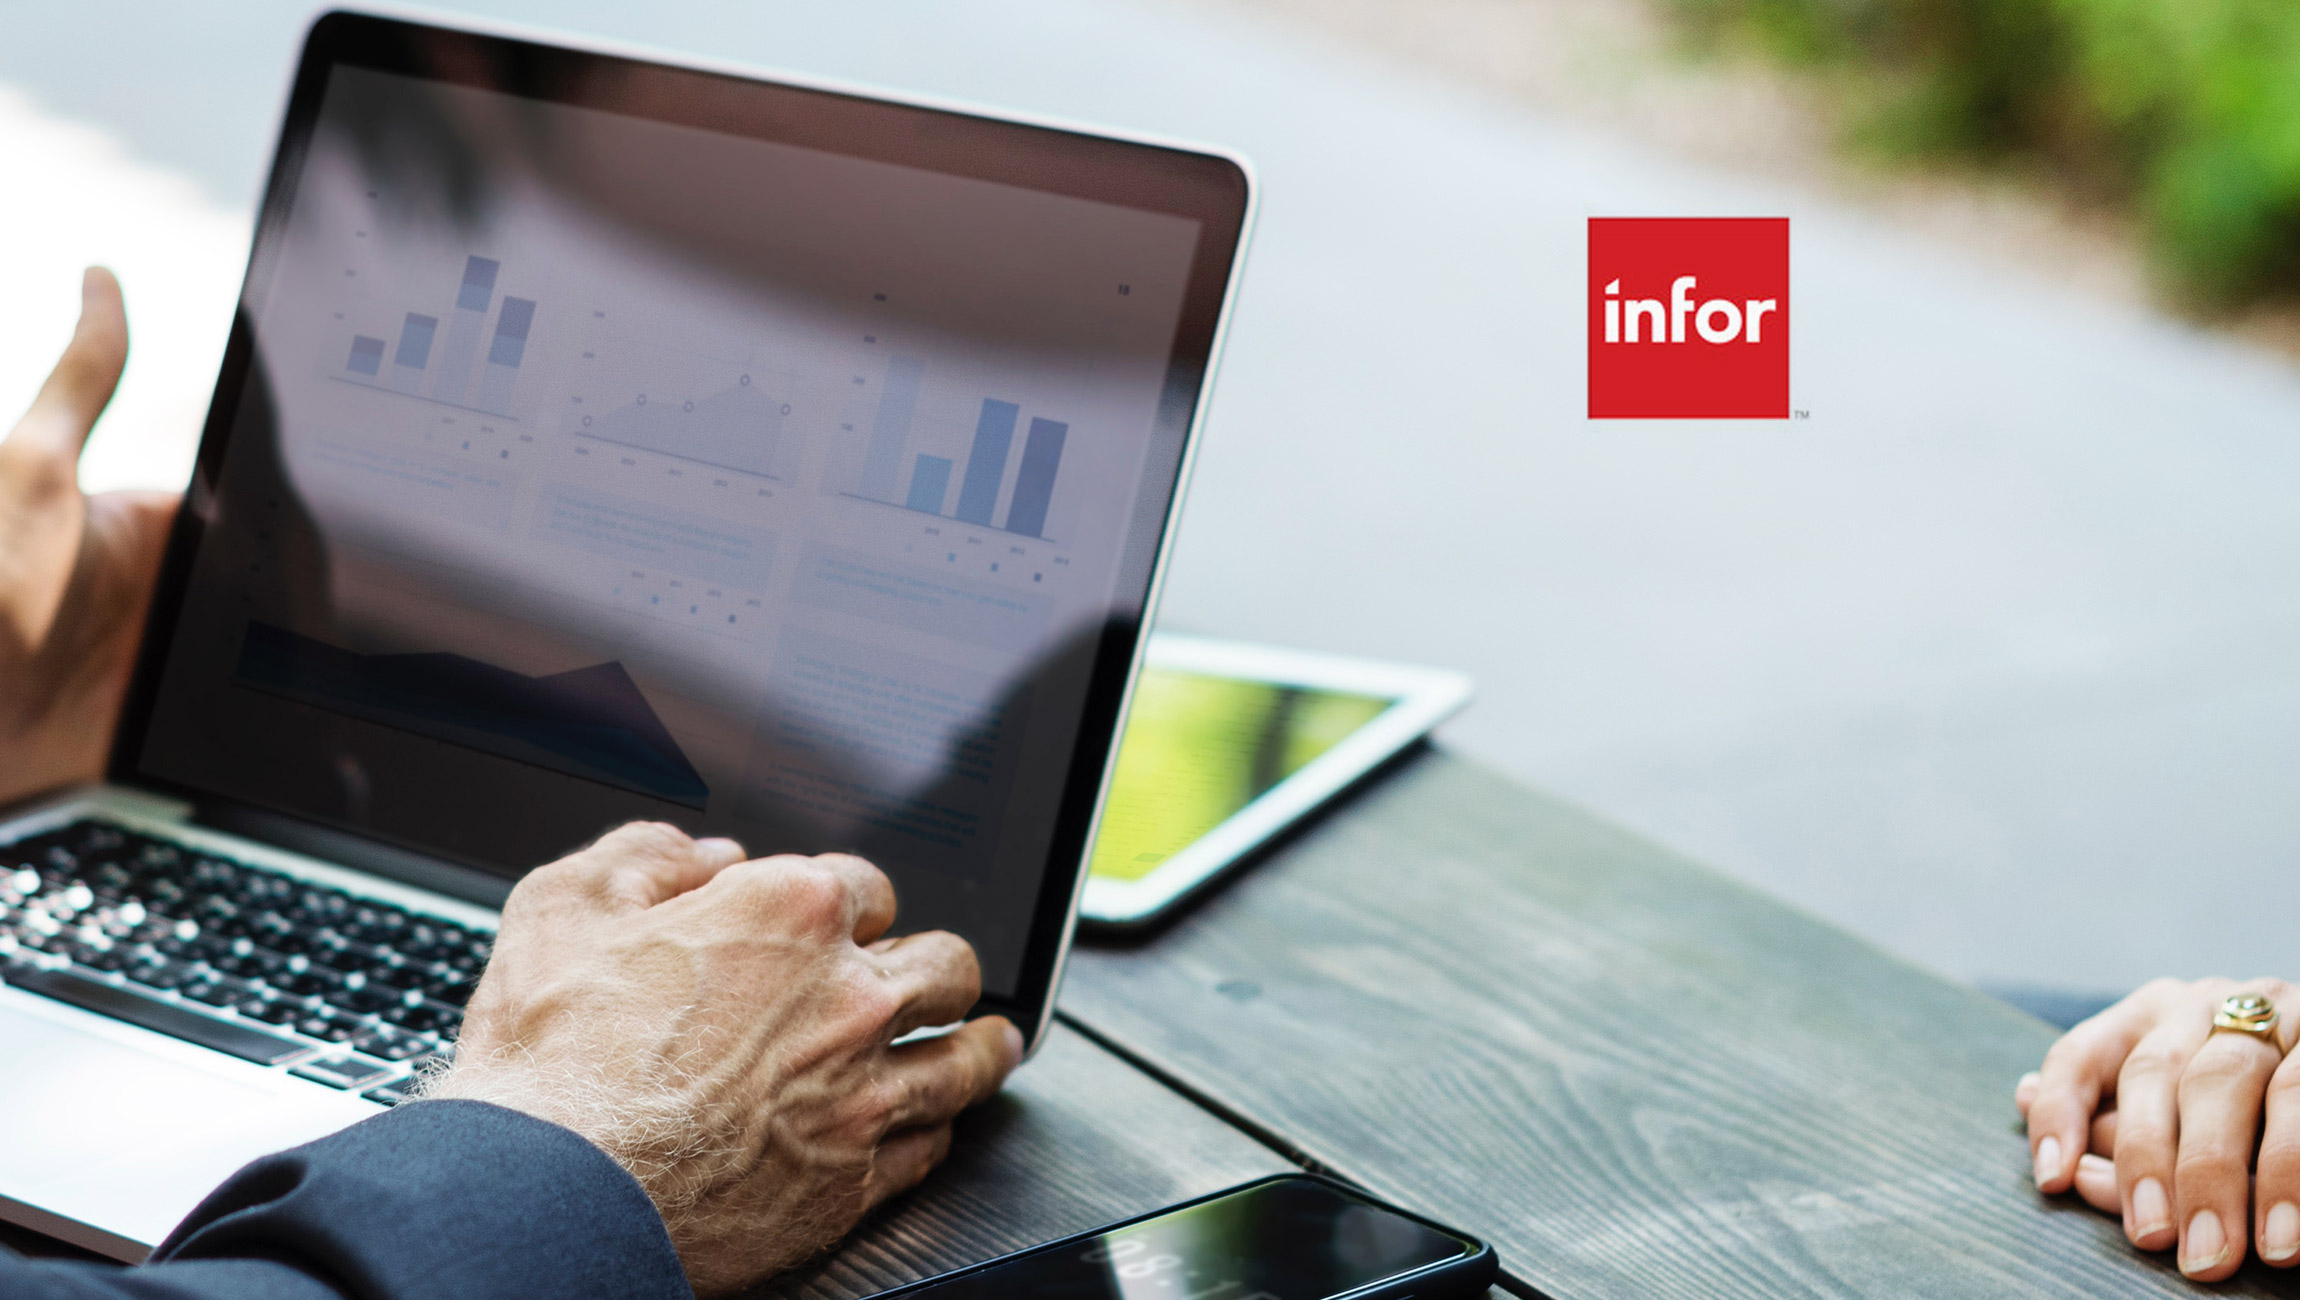 Delta Galil Strengthens Supply Chain with Infor